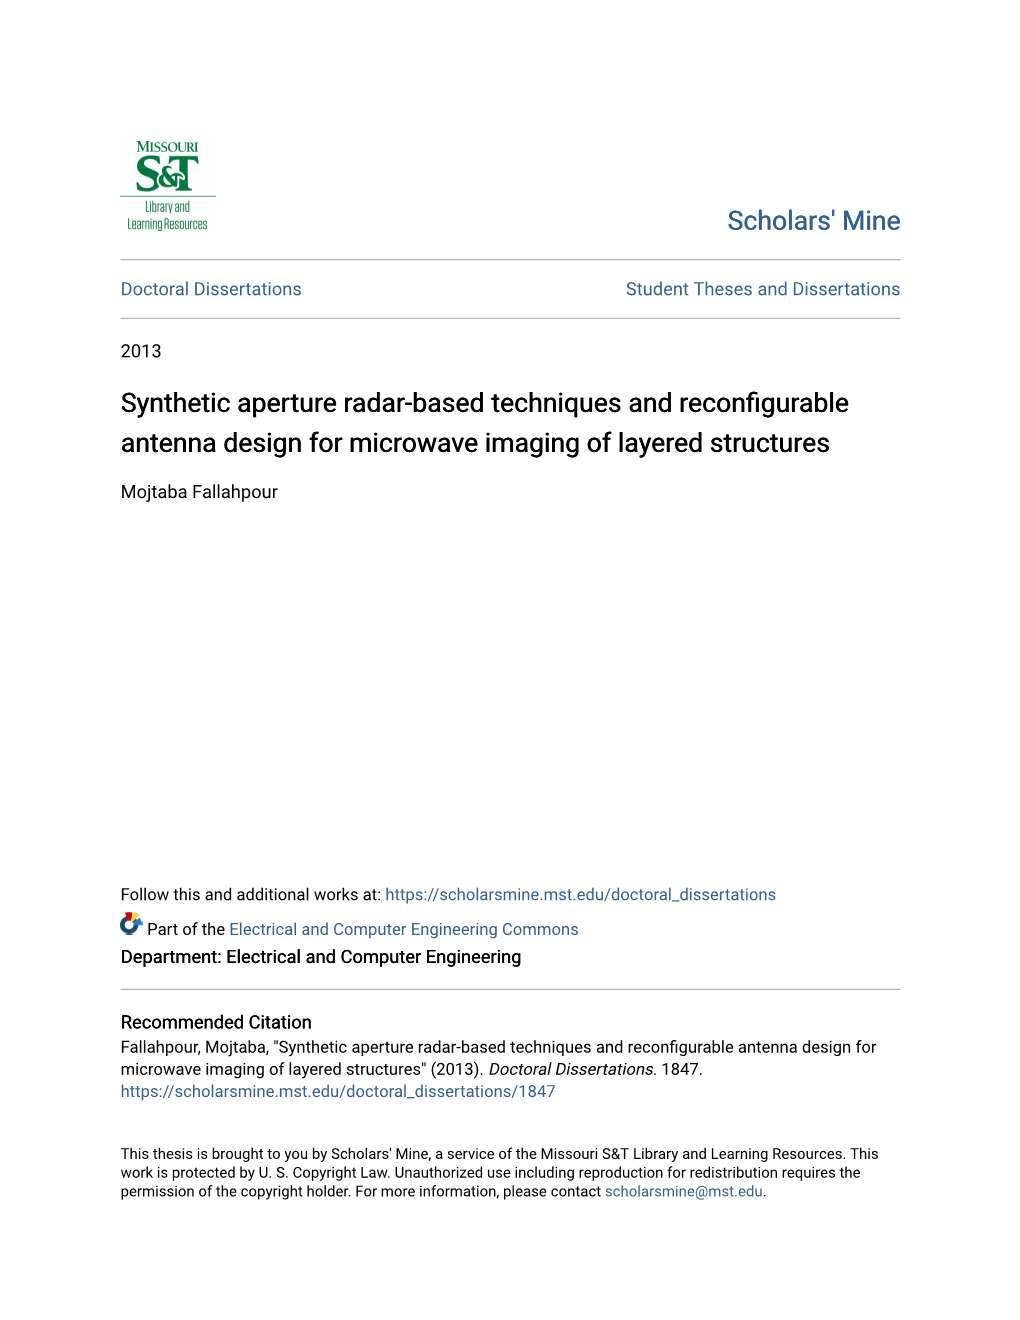 Synthetic Aperture Radar-Based Techniques and Reconfigurable Antenna Design for Microwave Imaging of Layered Structures